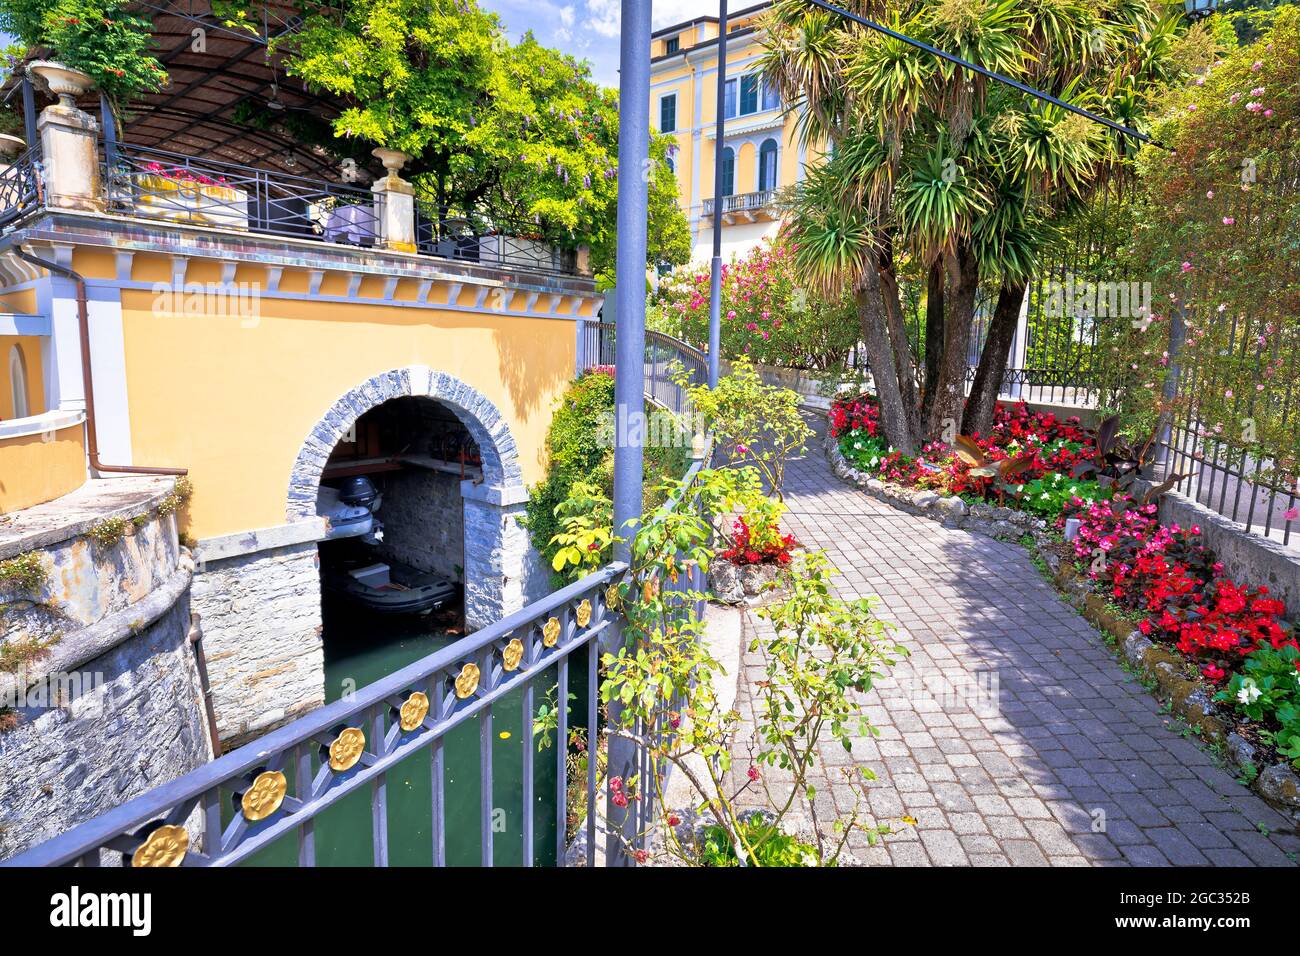 Town of Belaggio colorful flower street view, Como Lake, Lombardy region of Italy Stock Photo